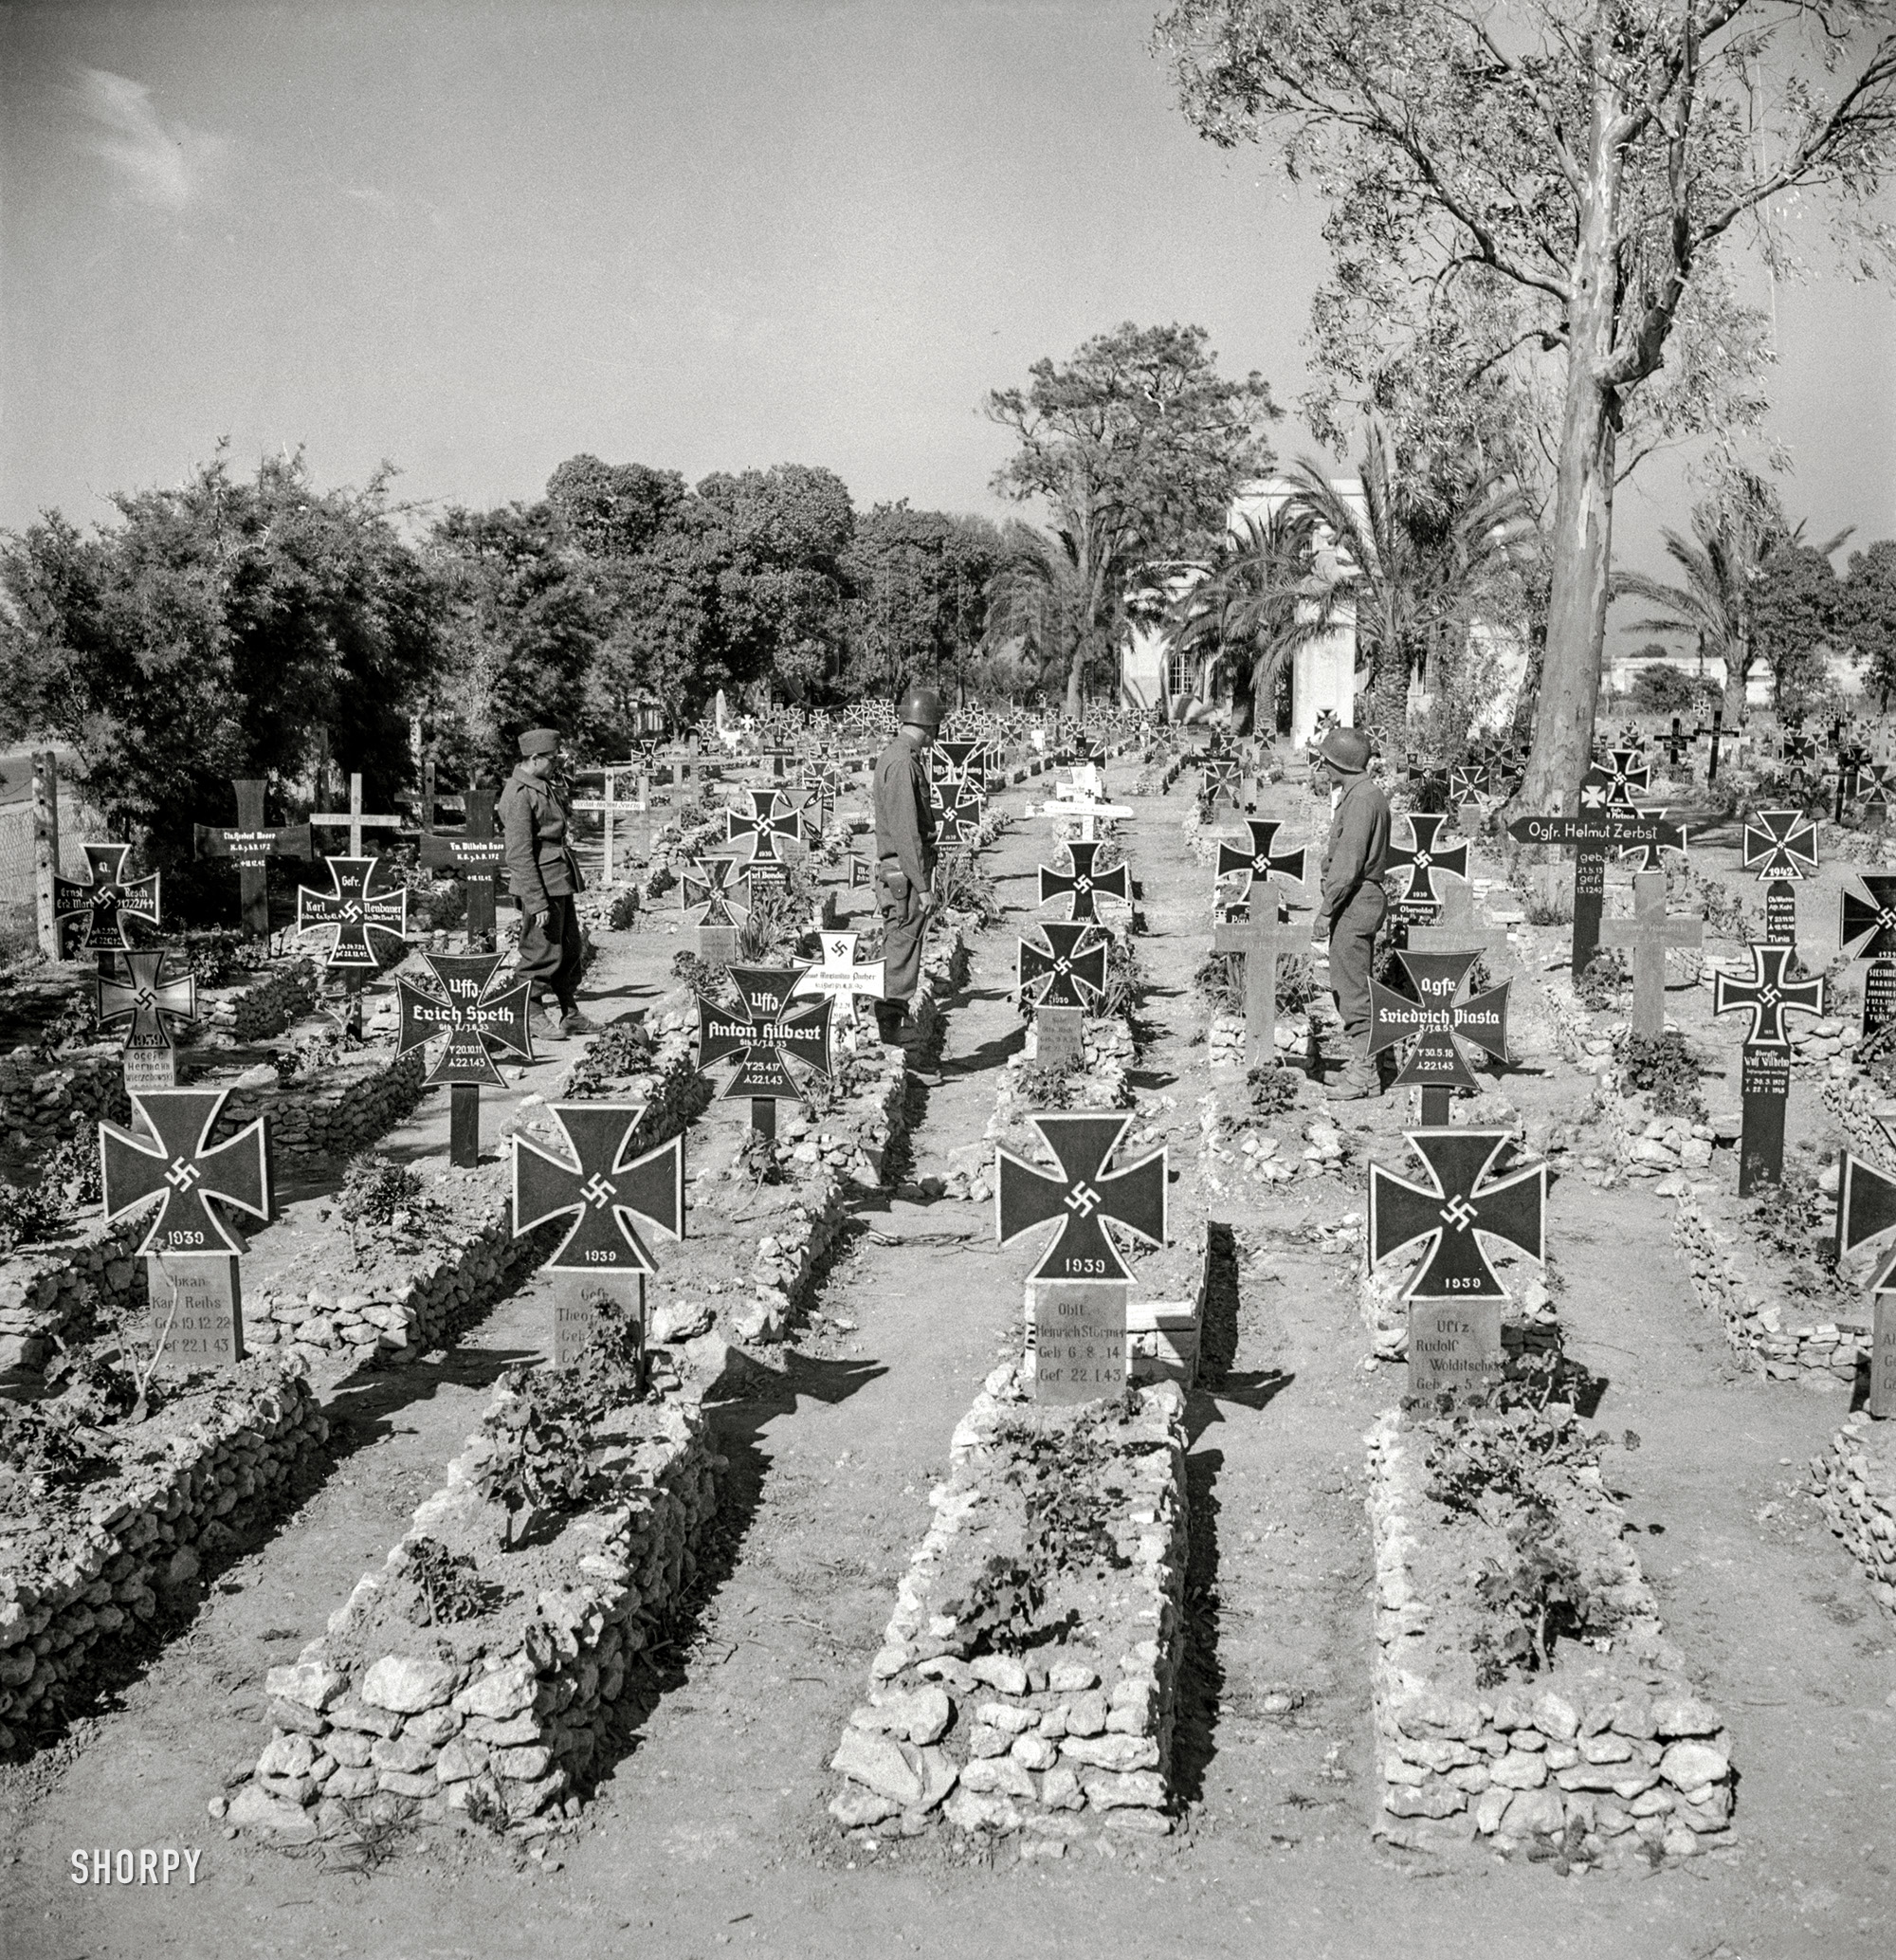 June 1943. Tunisia. "A German military cemetery on the outskirts of Tunis." Photo by Marjory Collins for the Office of War Information. View full size.